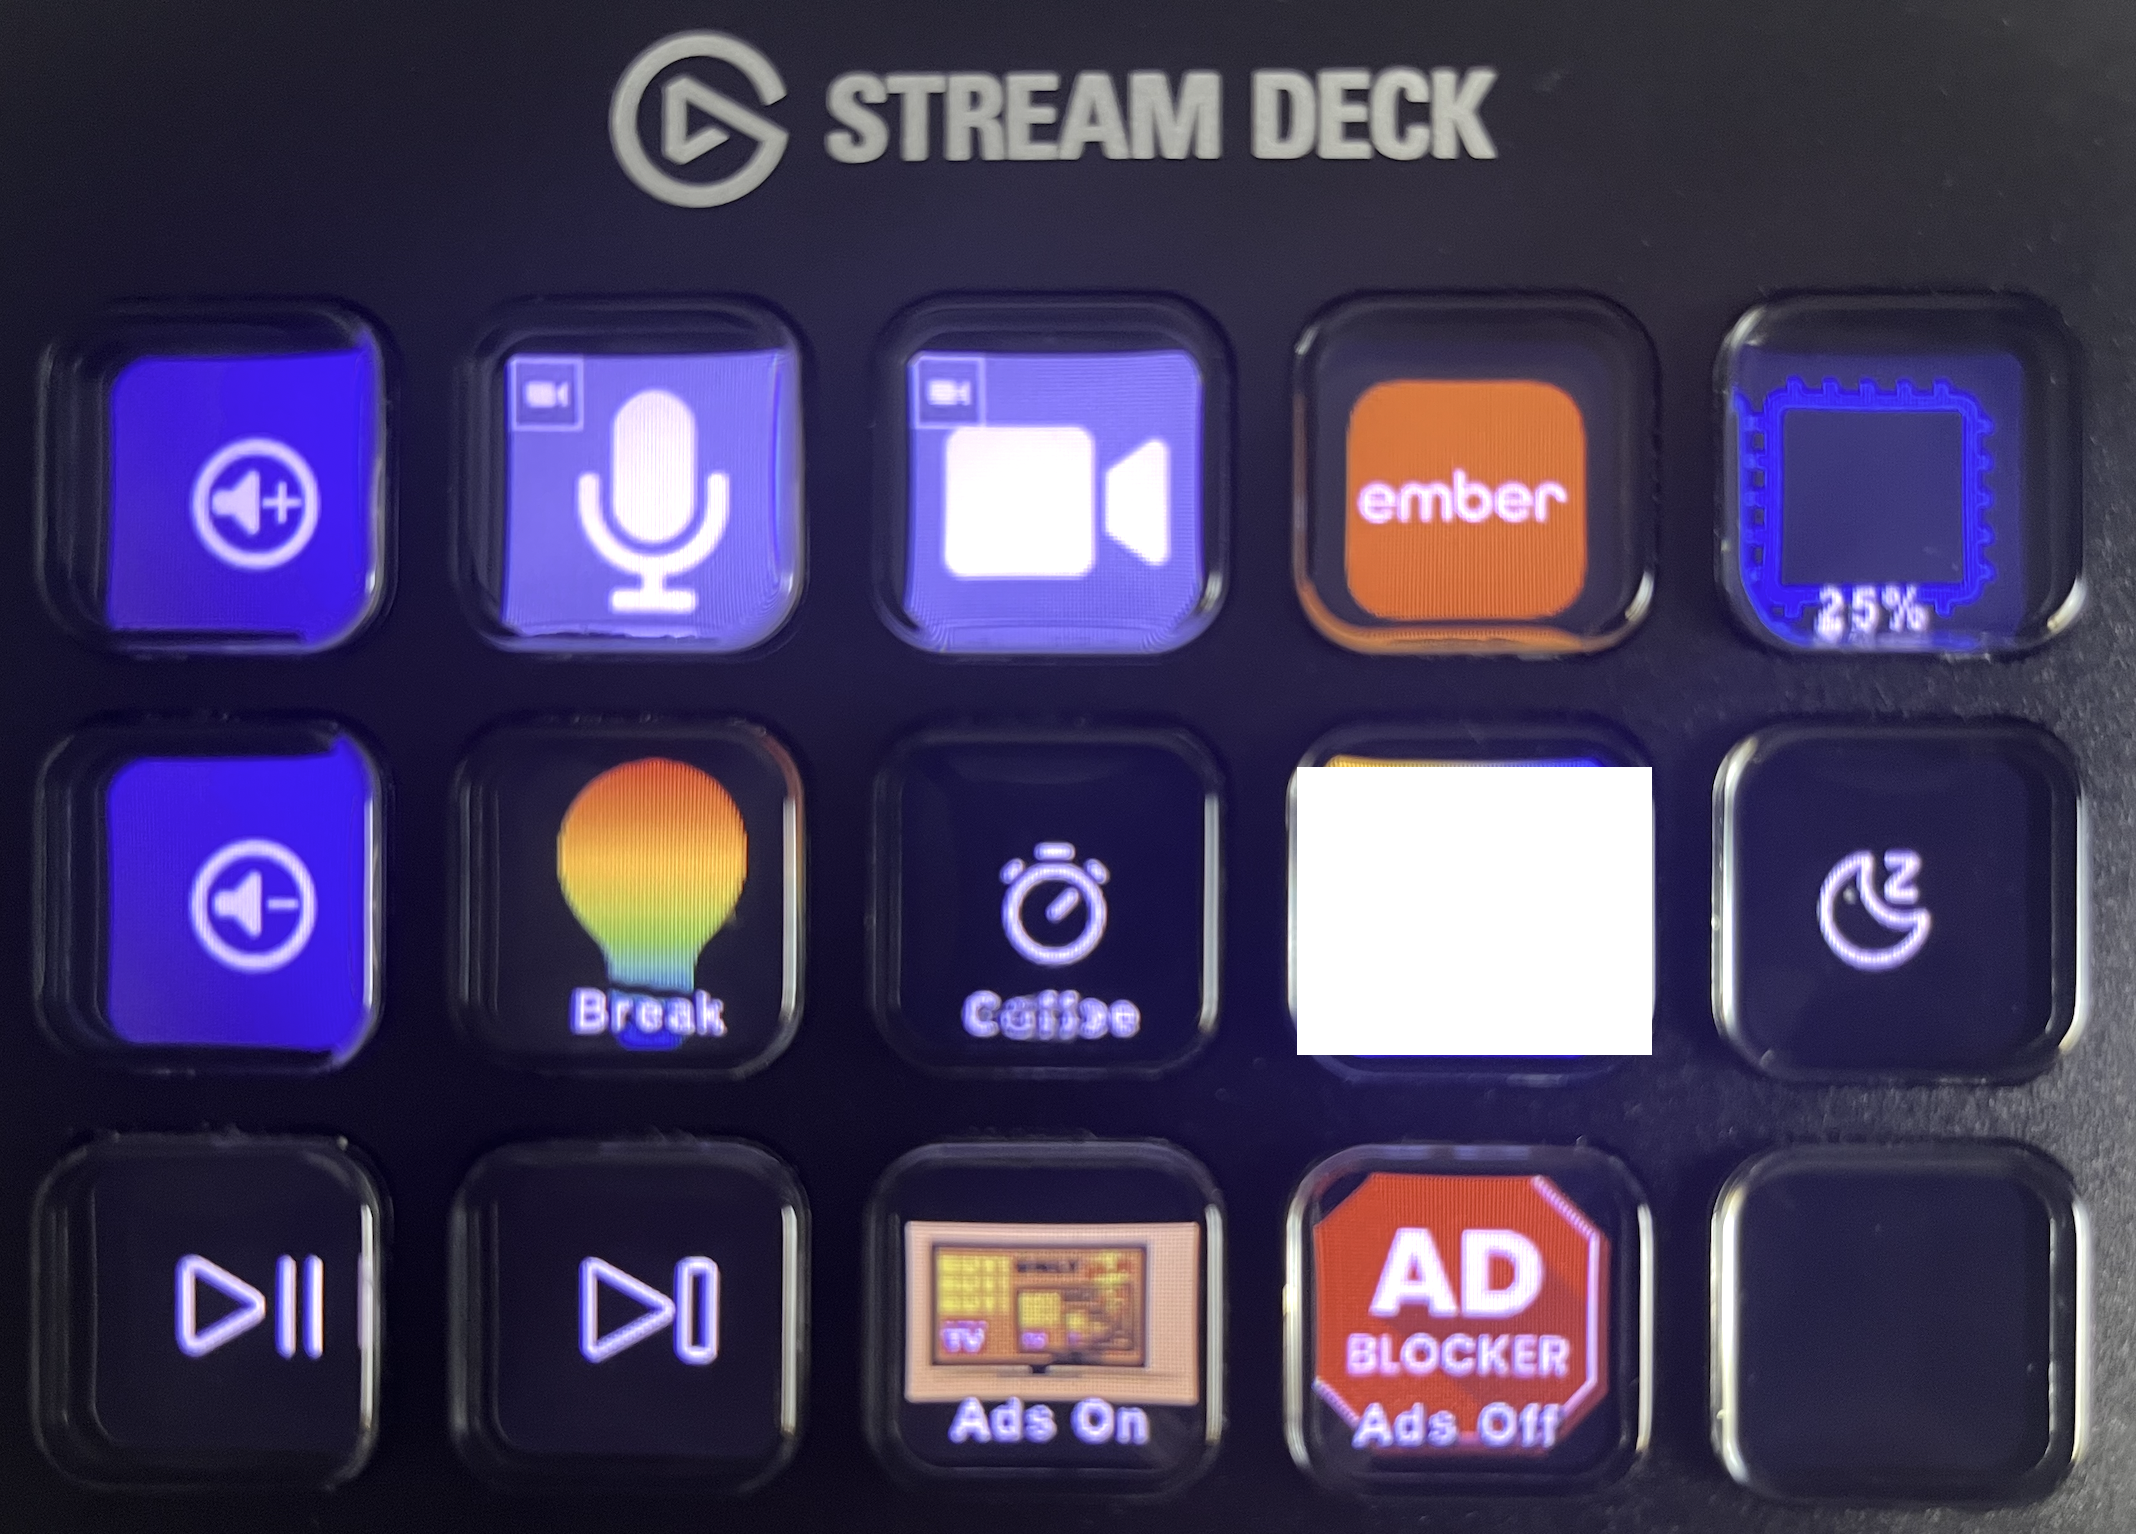 Image of Stream Deck with buttons for ads on and ads off